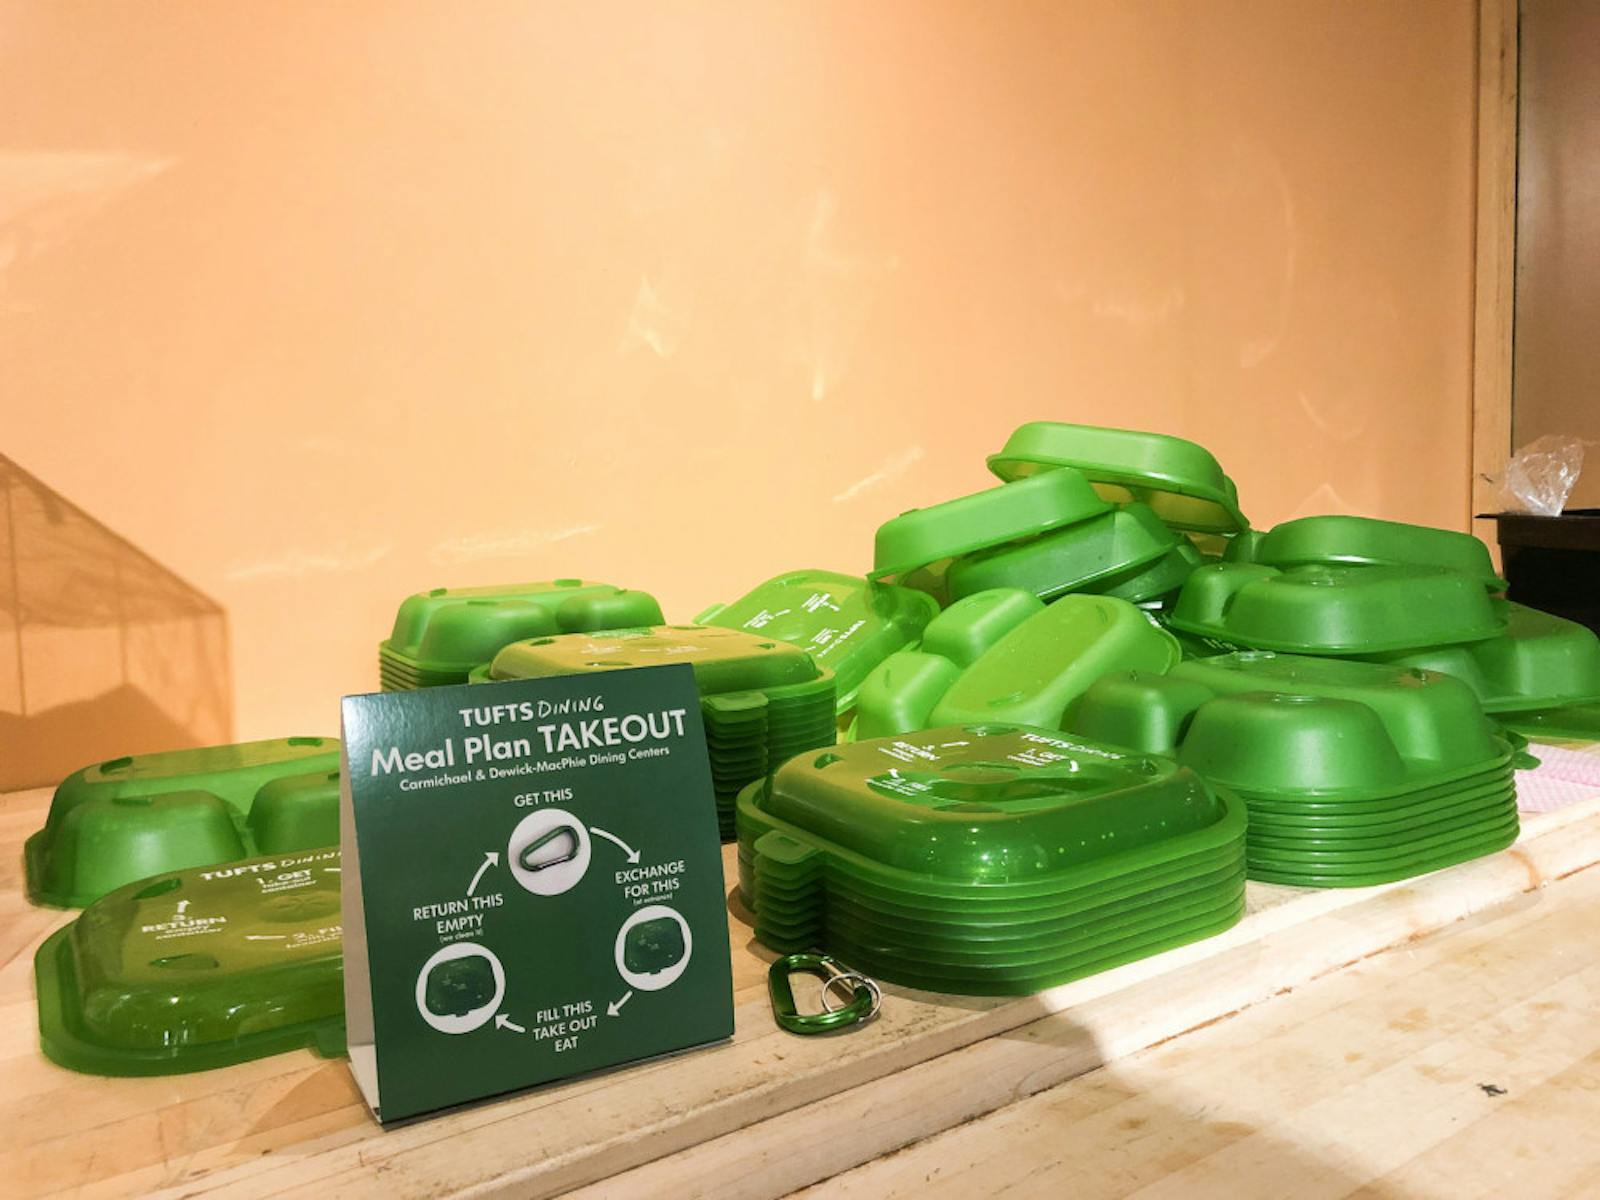 Finding Success with Reusable Takeout Containers - Center for EcoTechnology